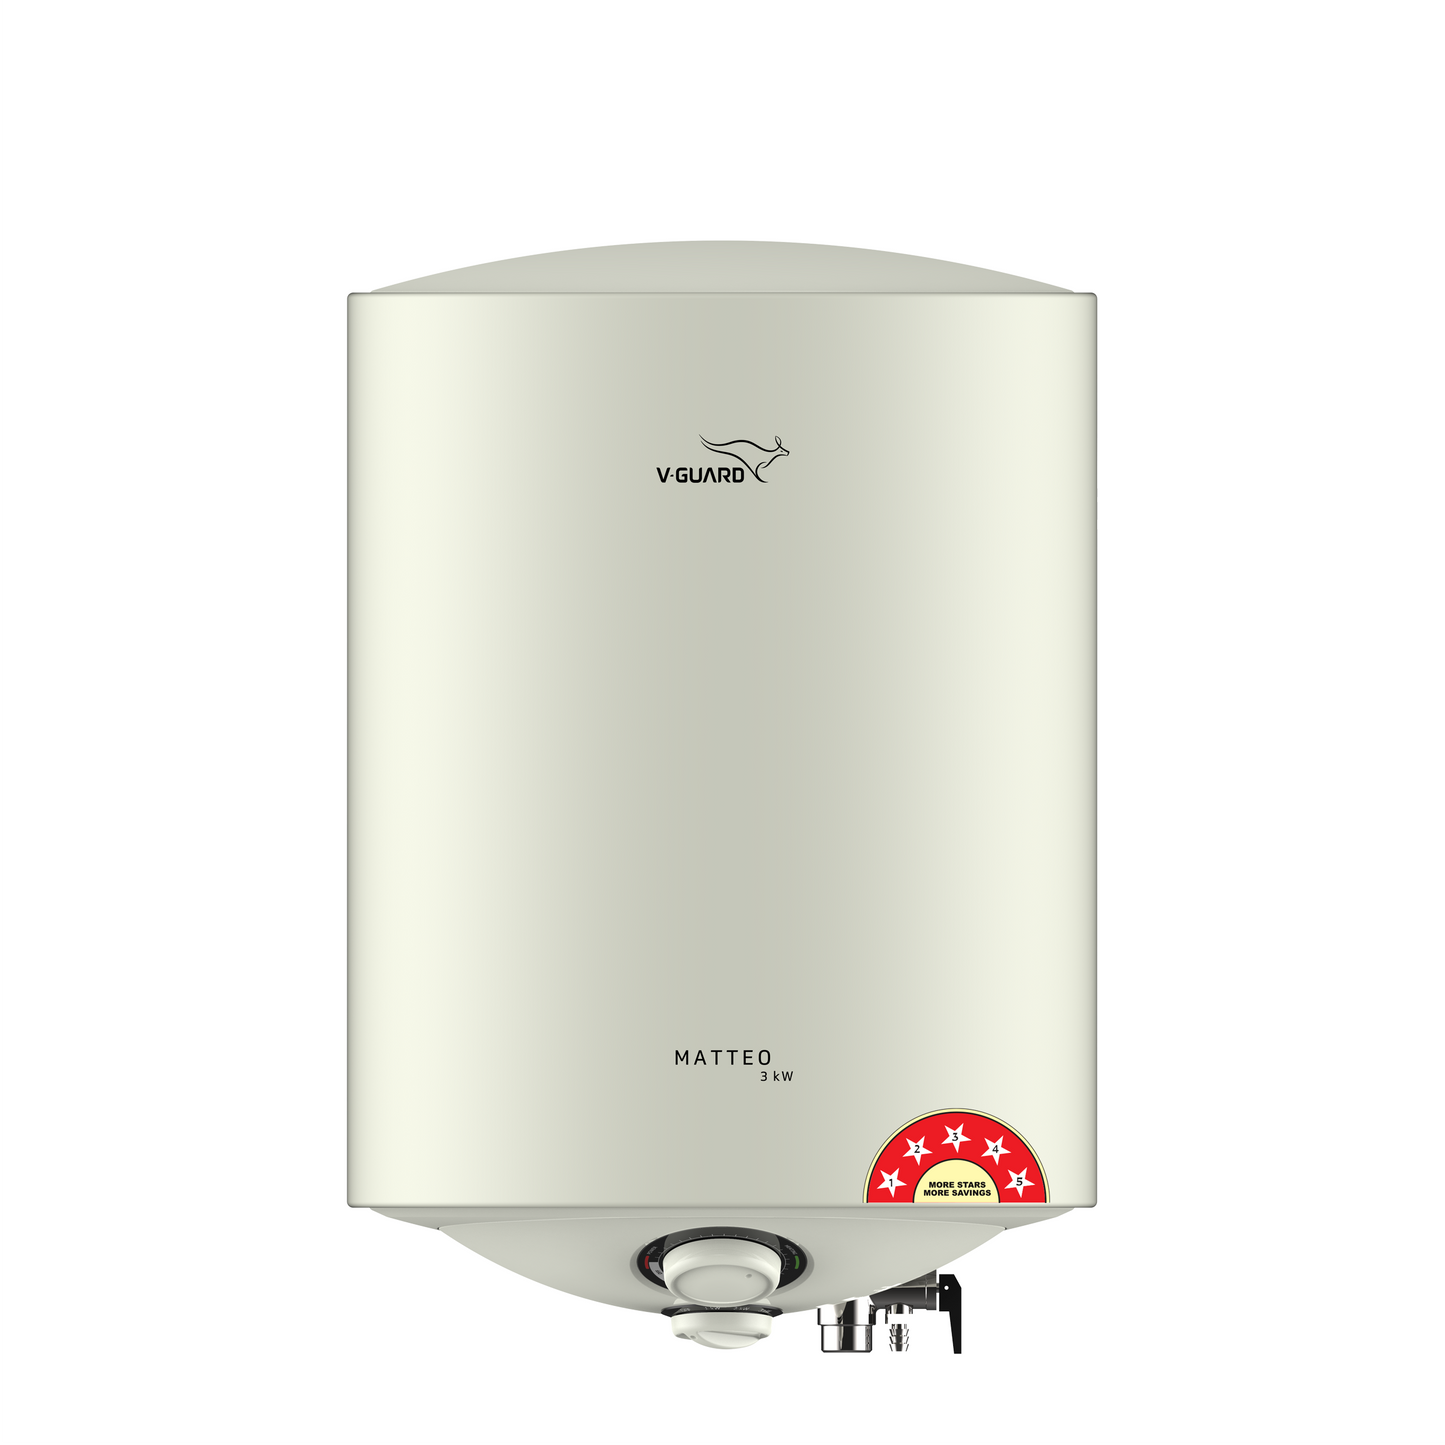 Matteo 3kW 15 L Water Heater with Faster Heating